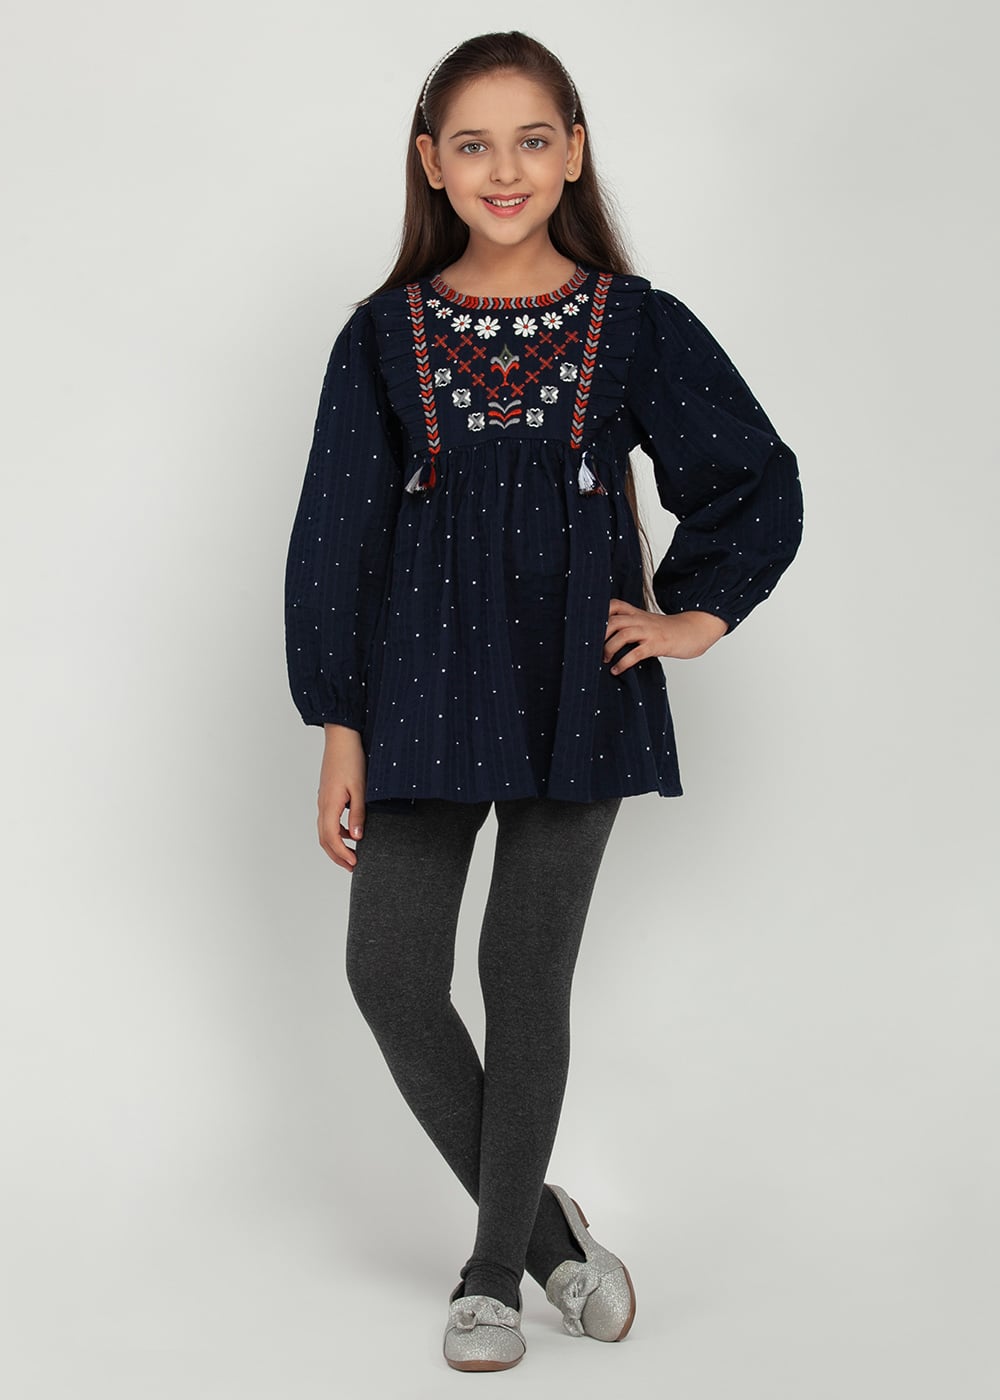 Blue Embroidered Tunic